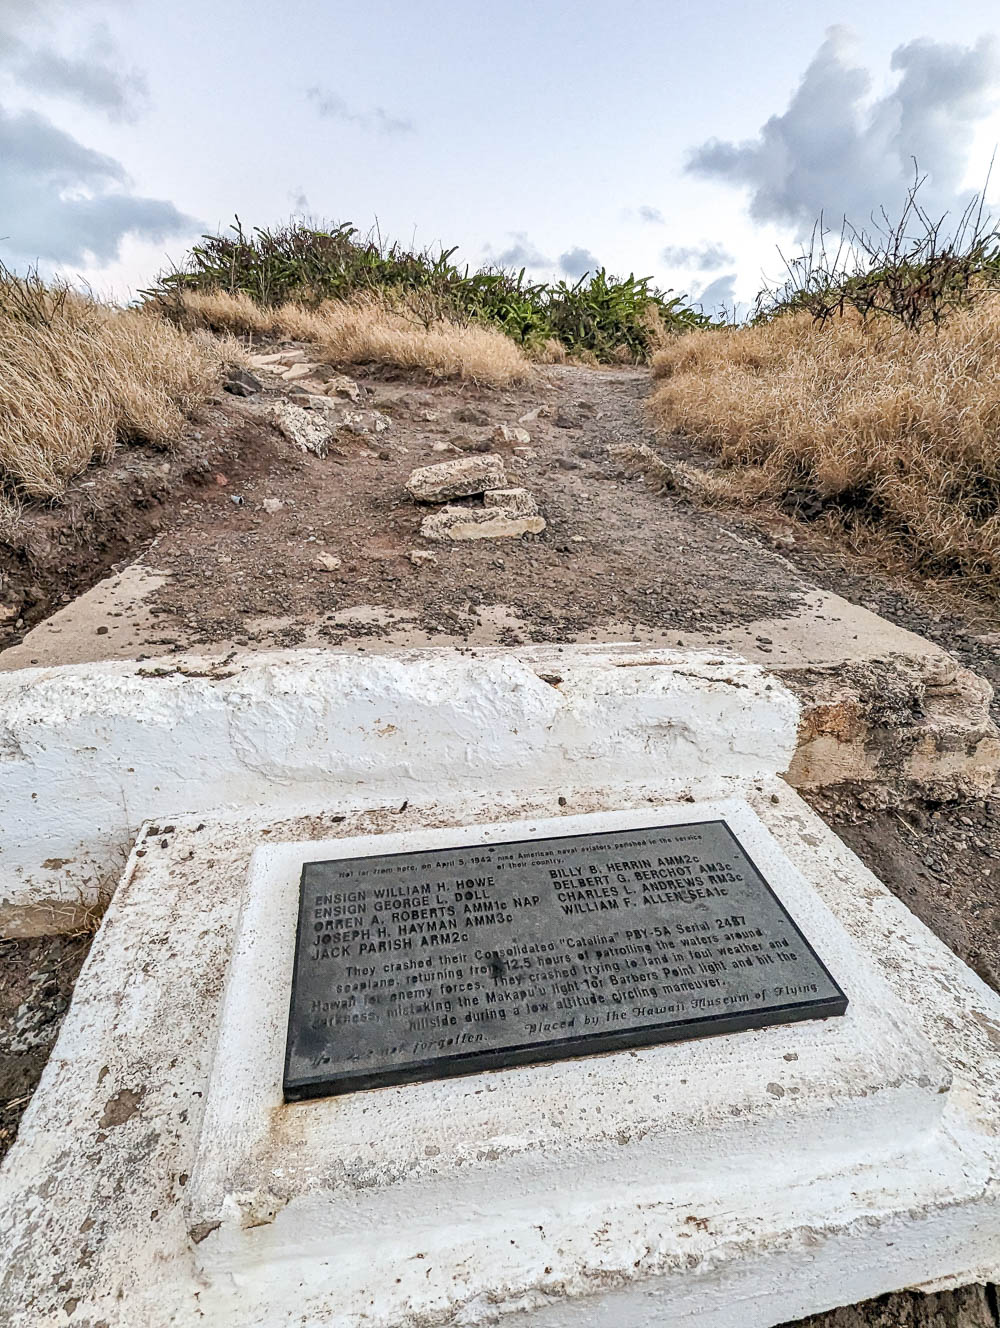 white stone memorial plaque surrounded by dirt and grass